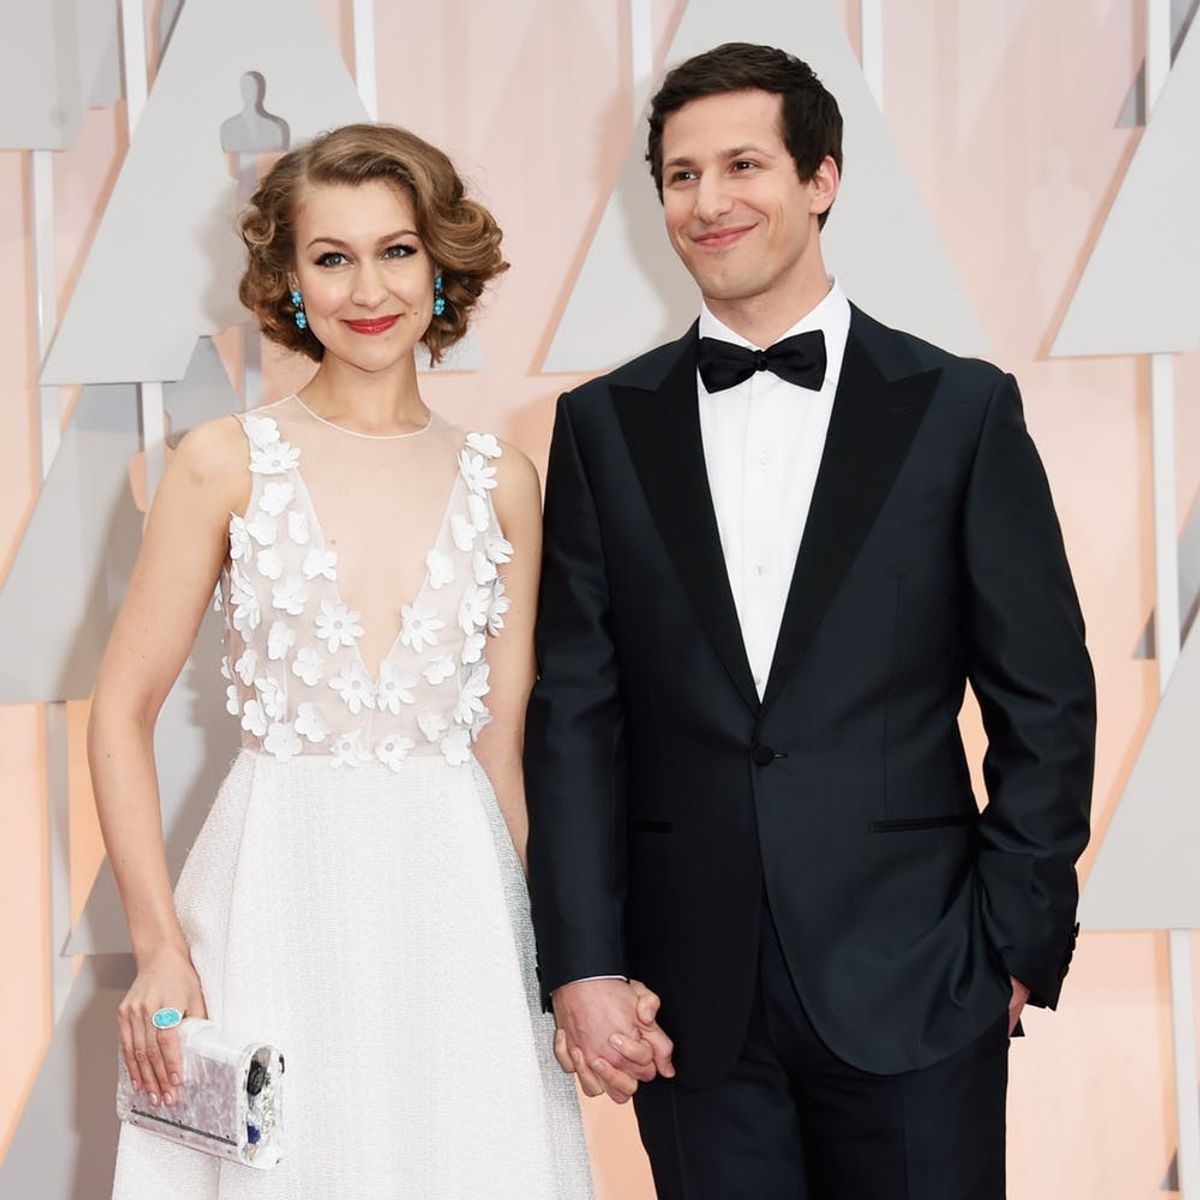 Surprise! Andy Samberg and Joanna Newsom Welcome a Baby Girl